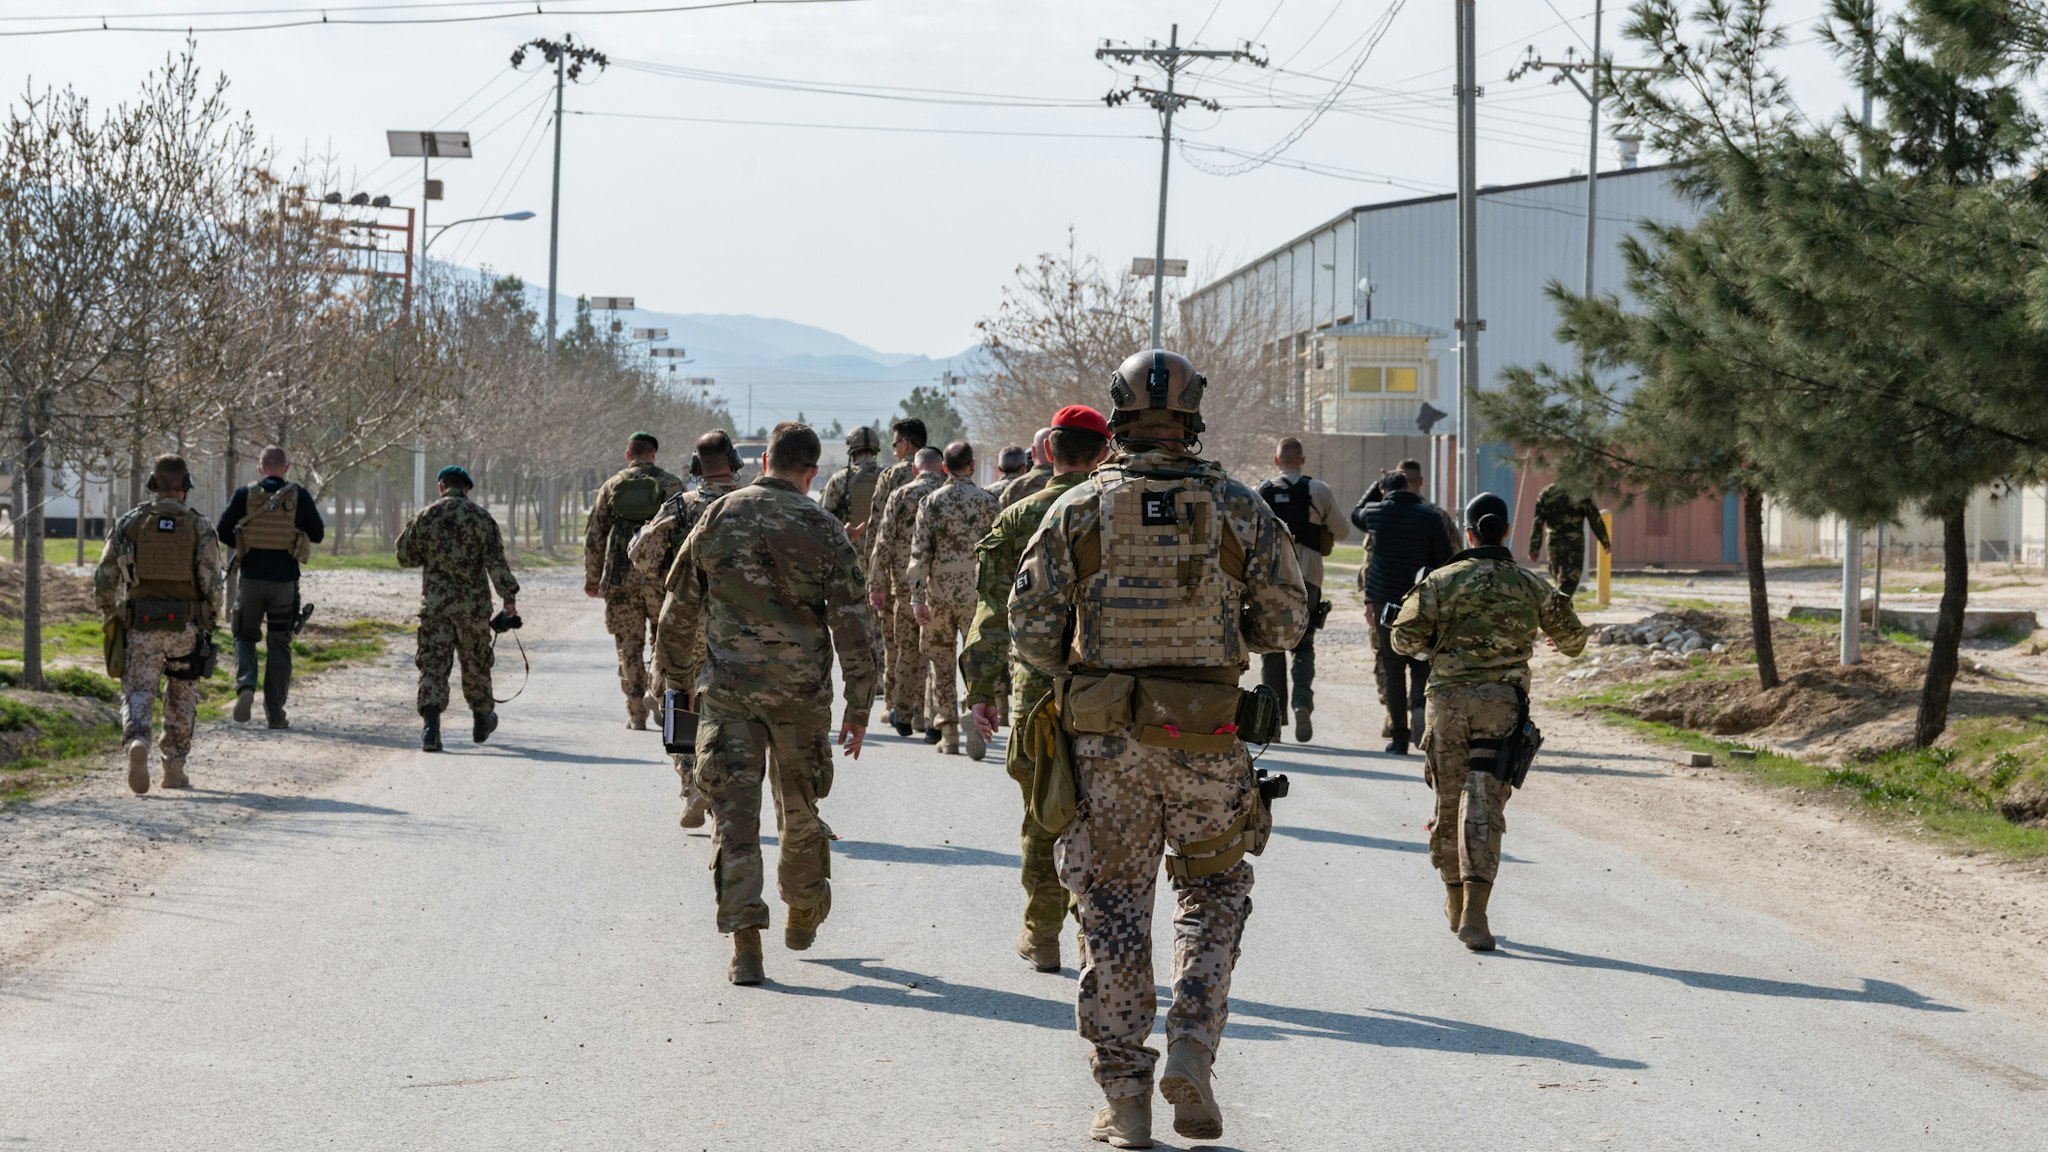 Rear View Of Army Soldiers Walking On Road In City - stock photo